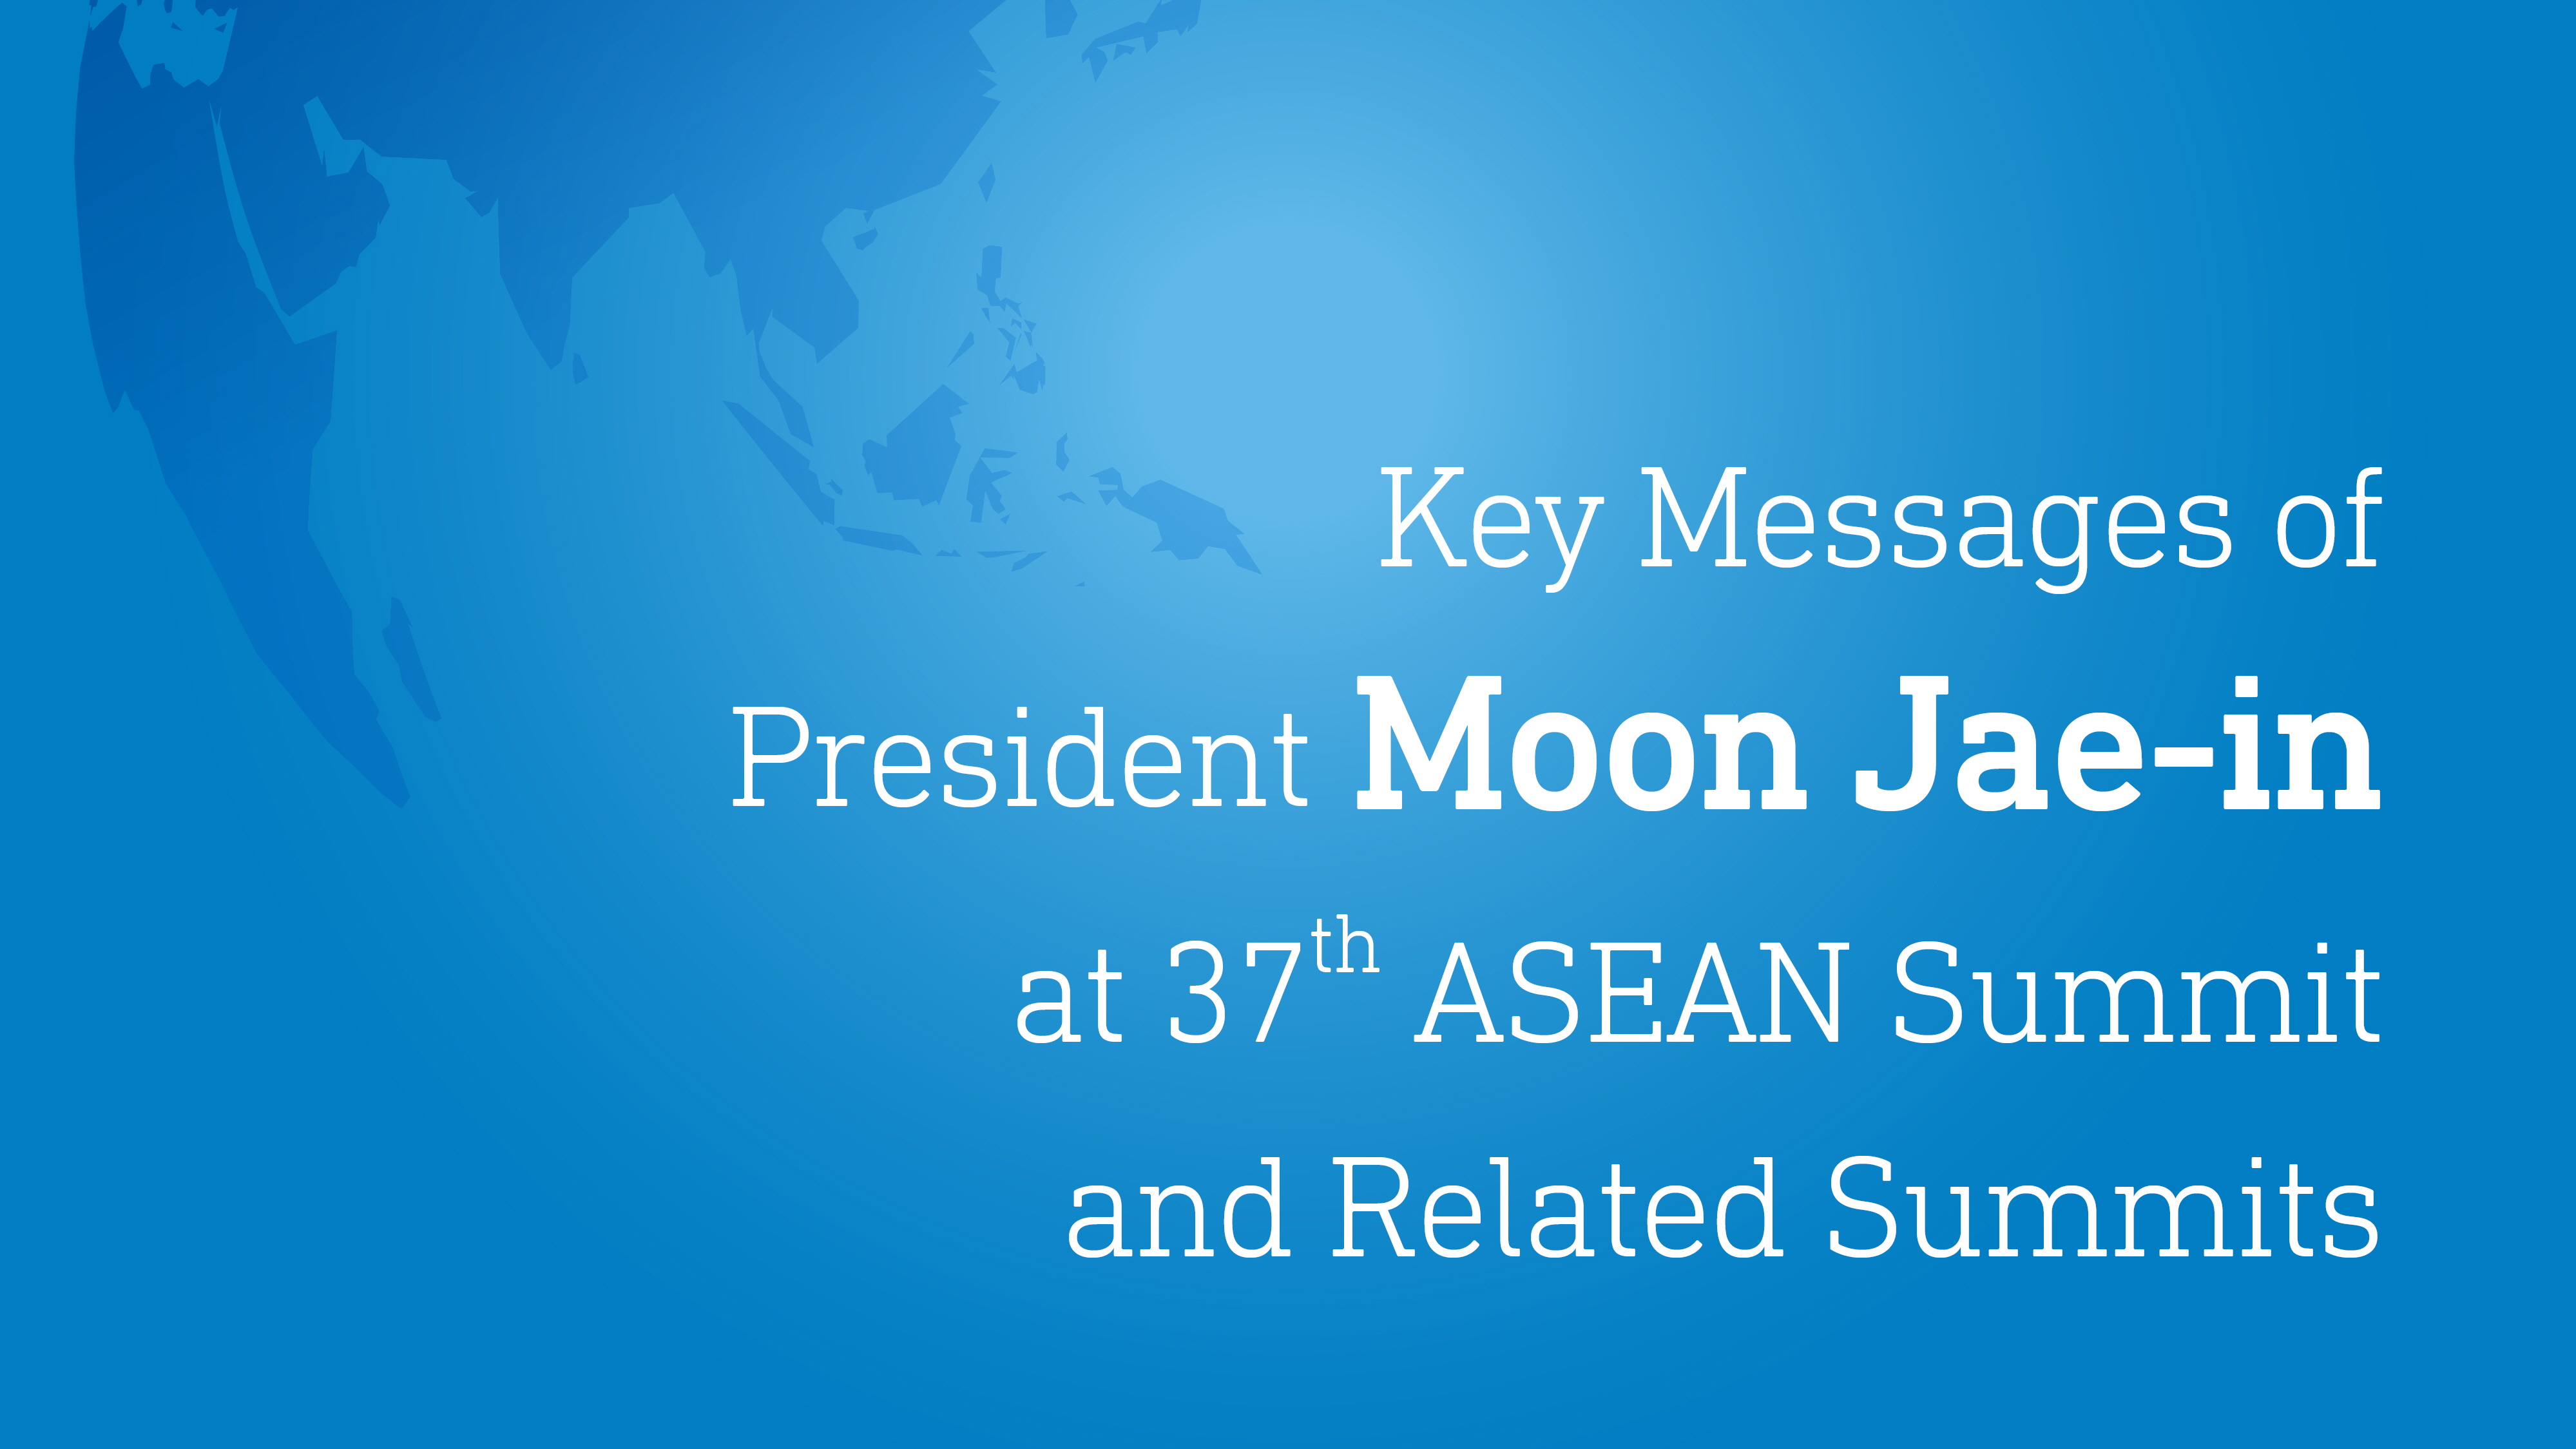 Key Messages of President Moon Jae-in at 37th ASEAN Summit and Related Summits